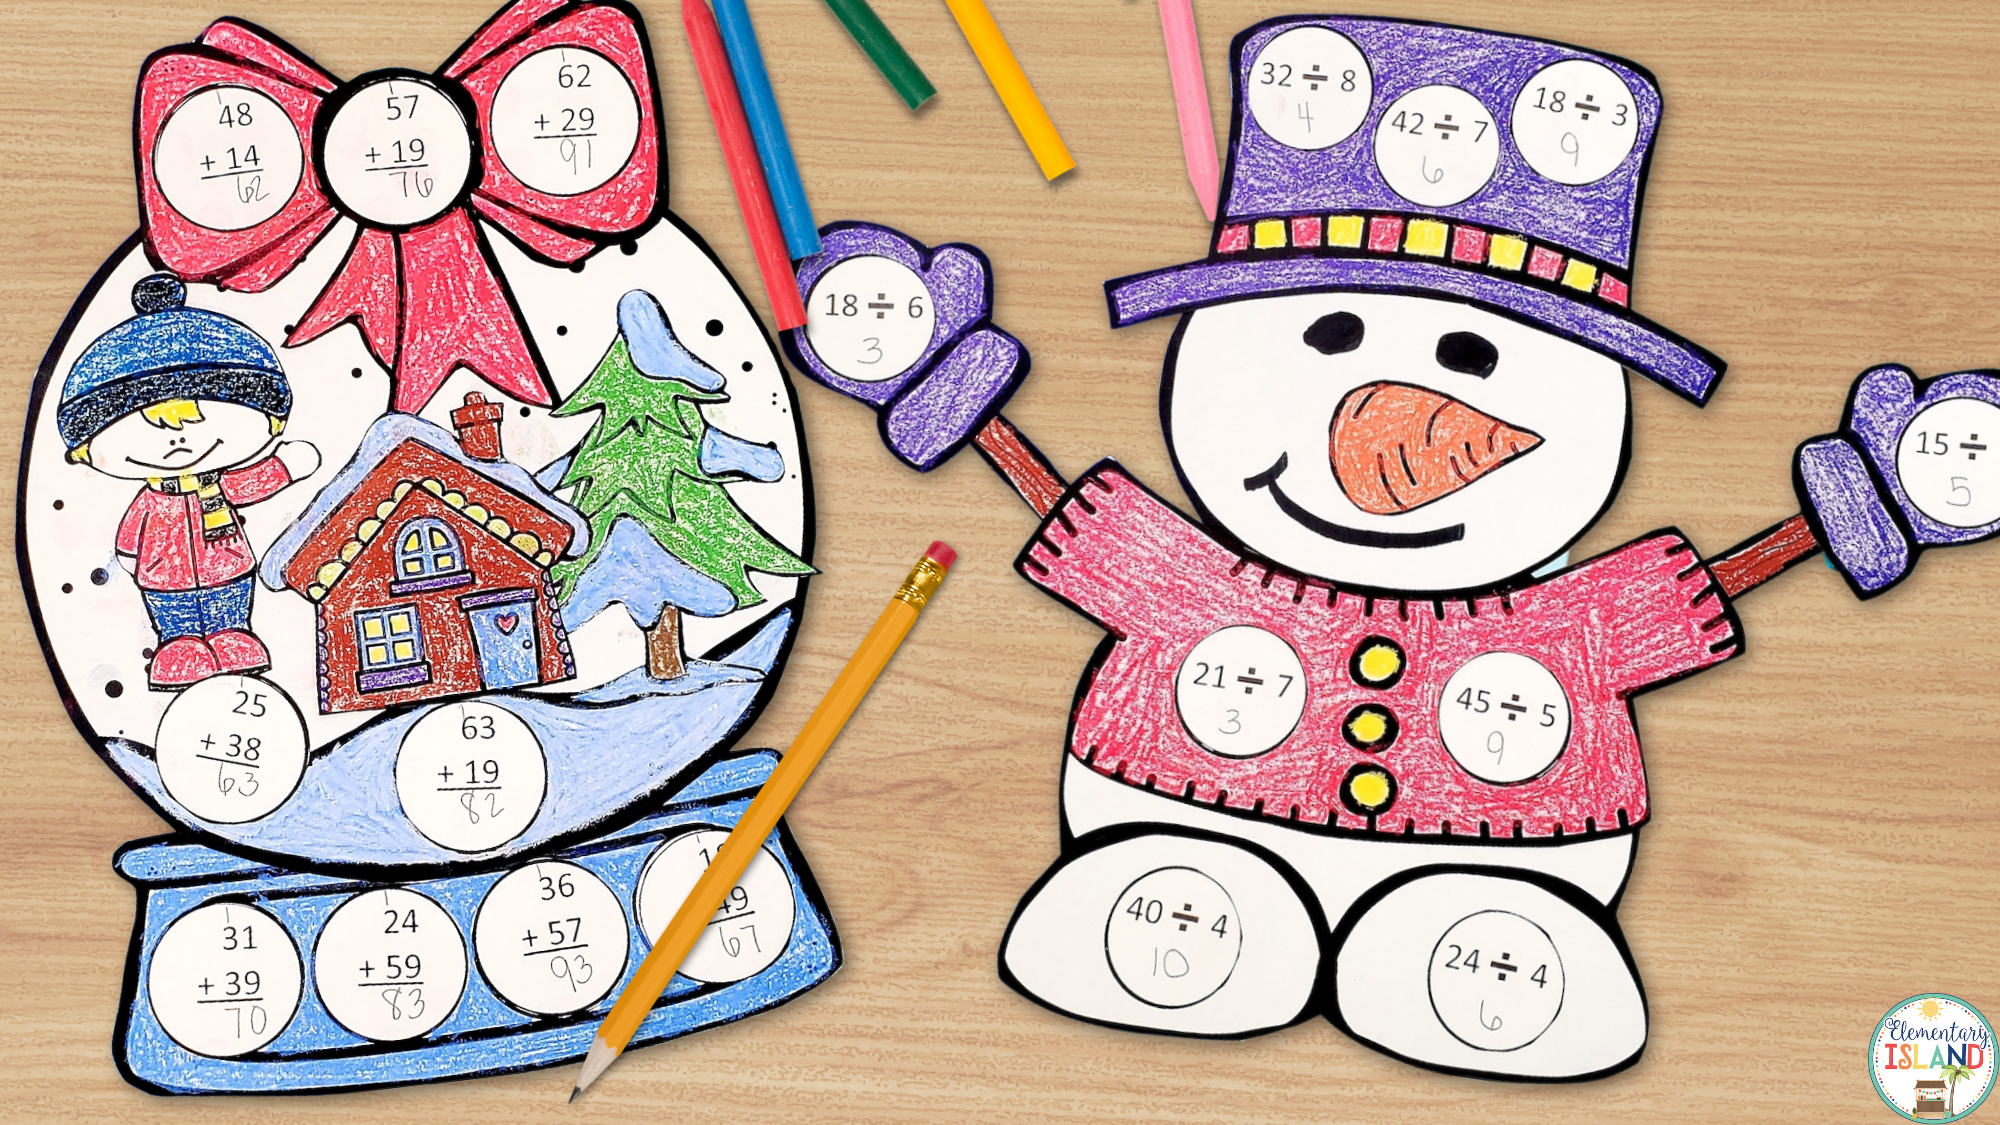 You know how much your students love crafts, so include these holiday math activities in your easy activities for substitute teachers.